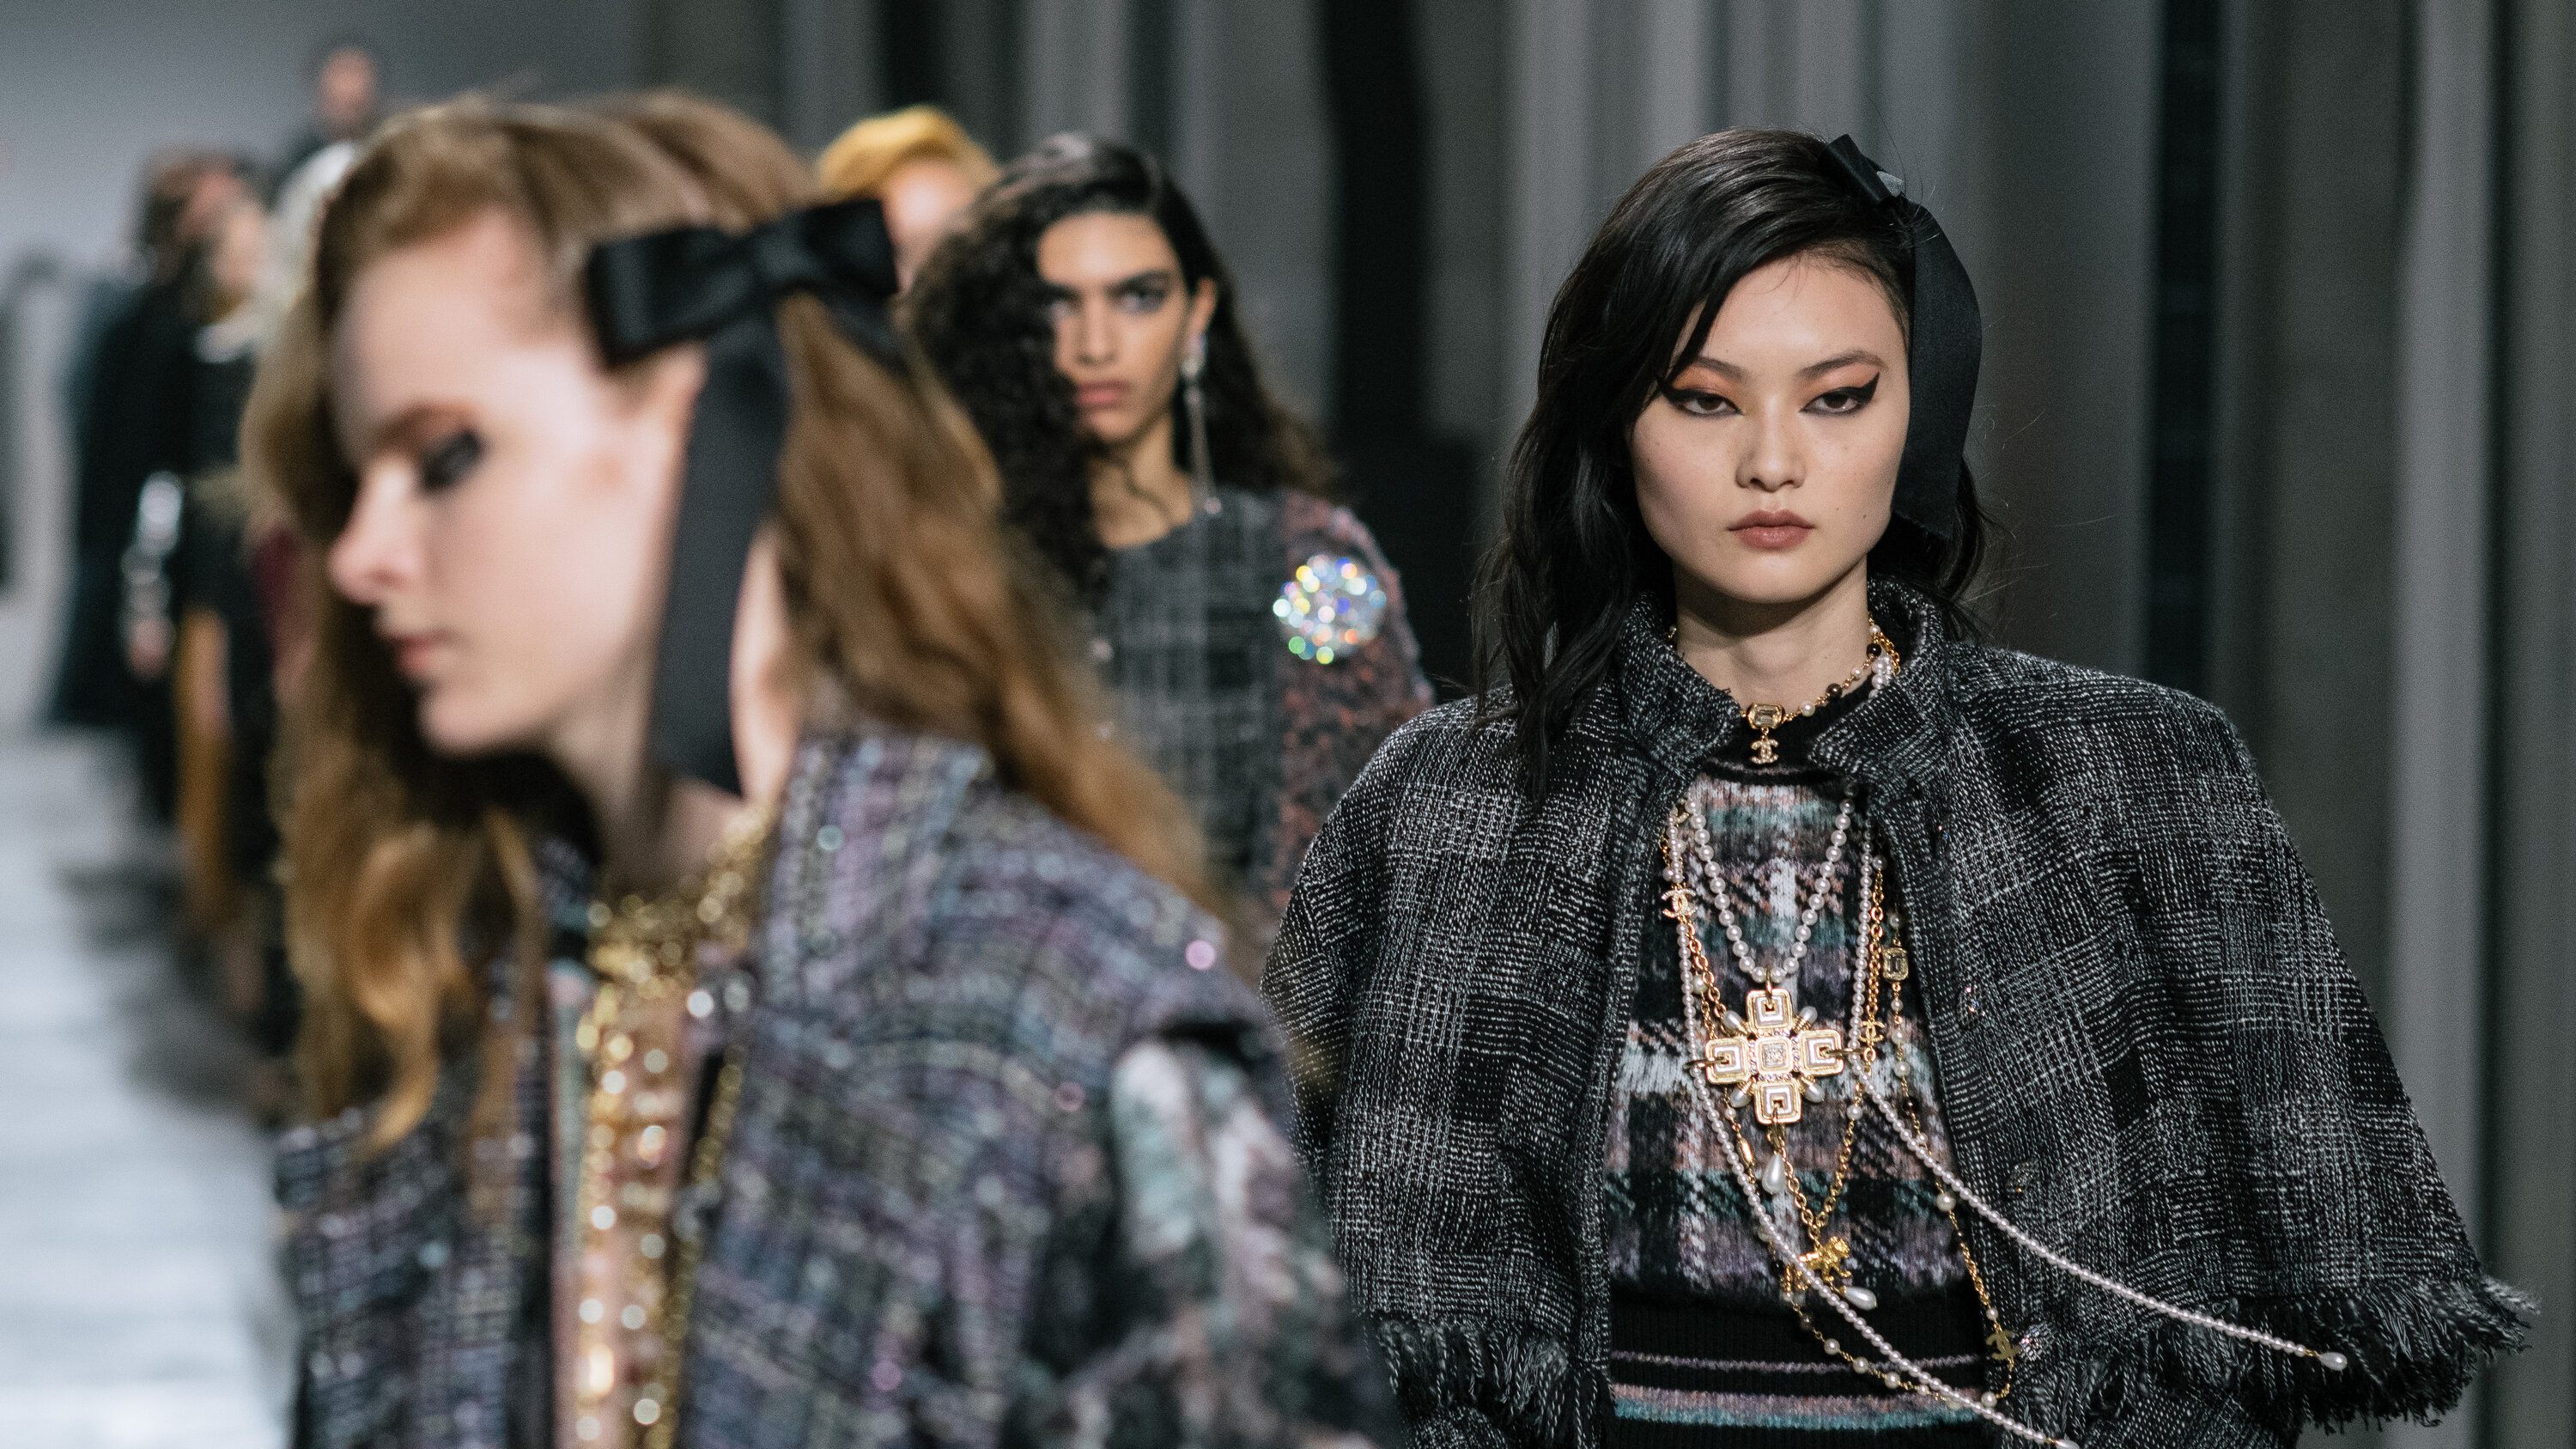 Chanel presents the first métiers d'art collection at the new le19m craft center